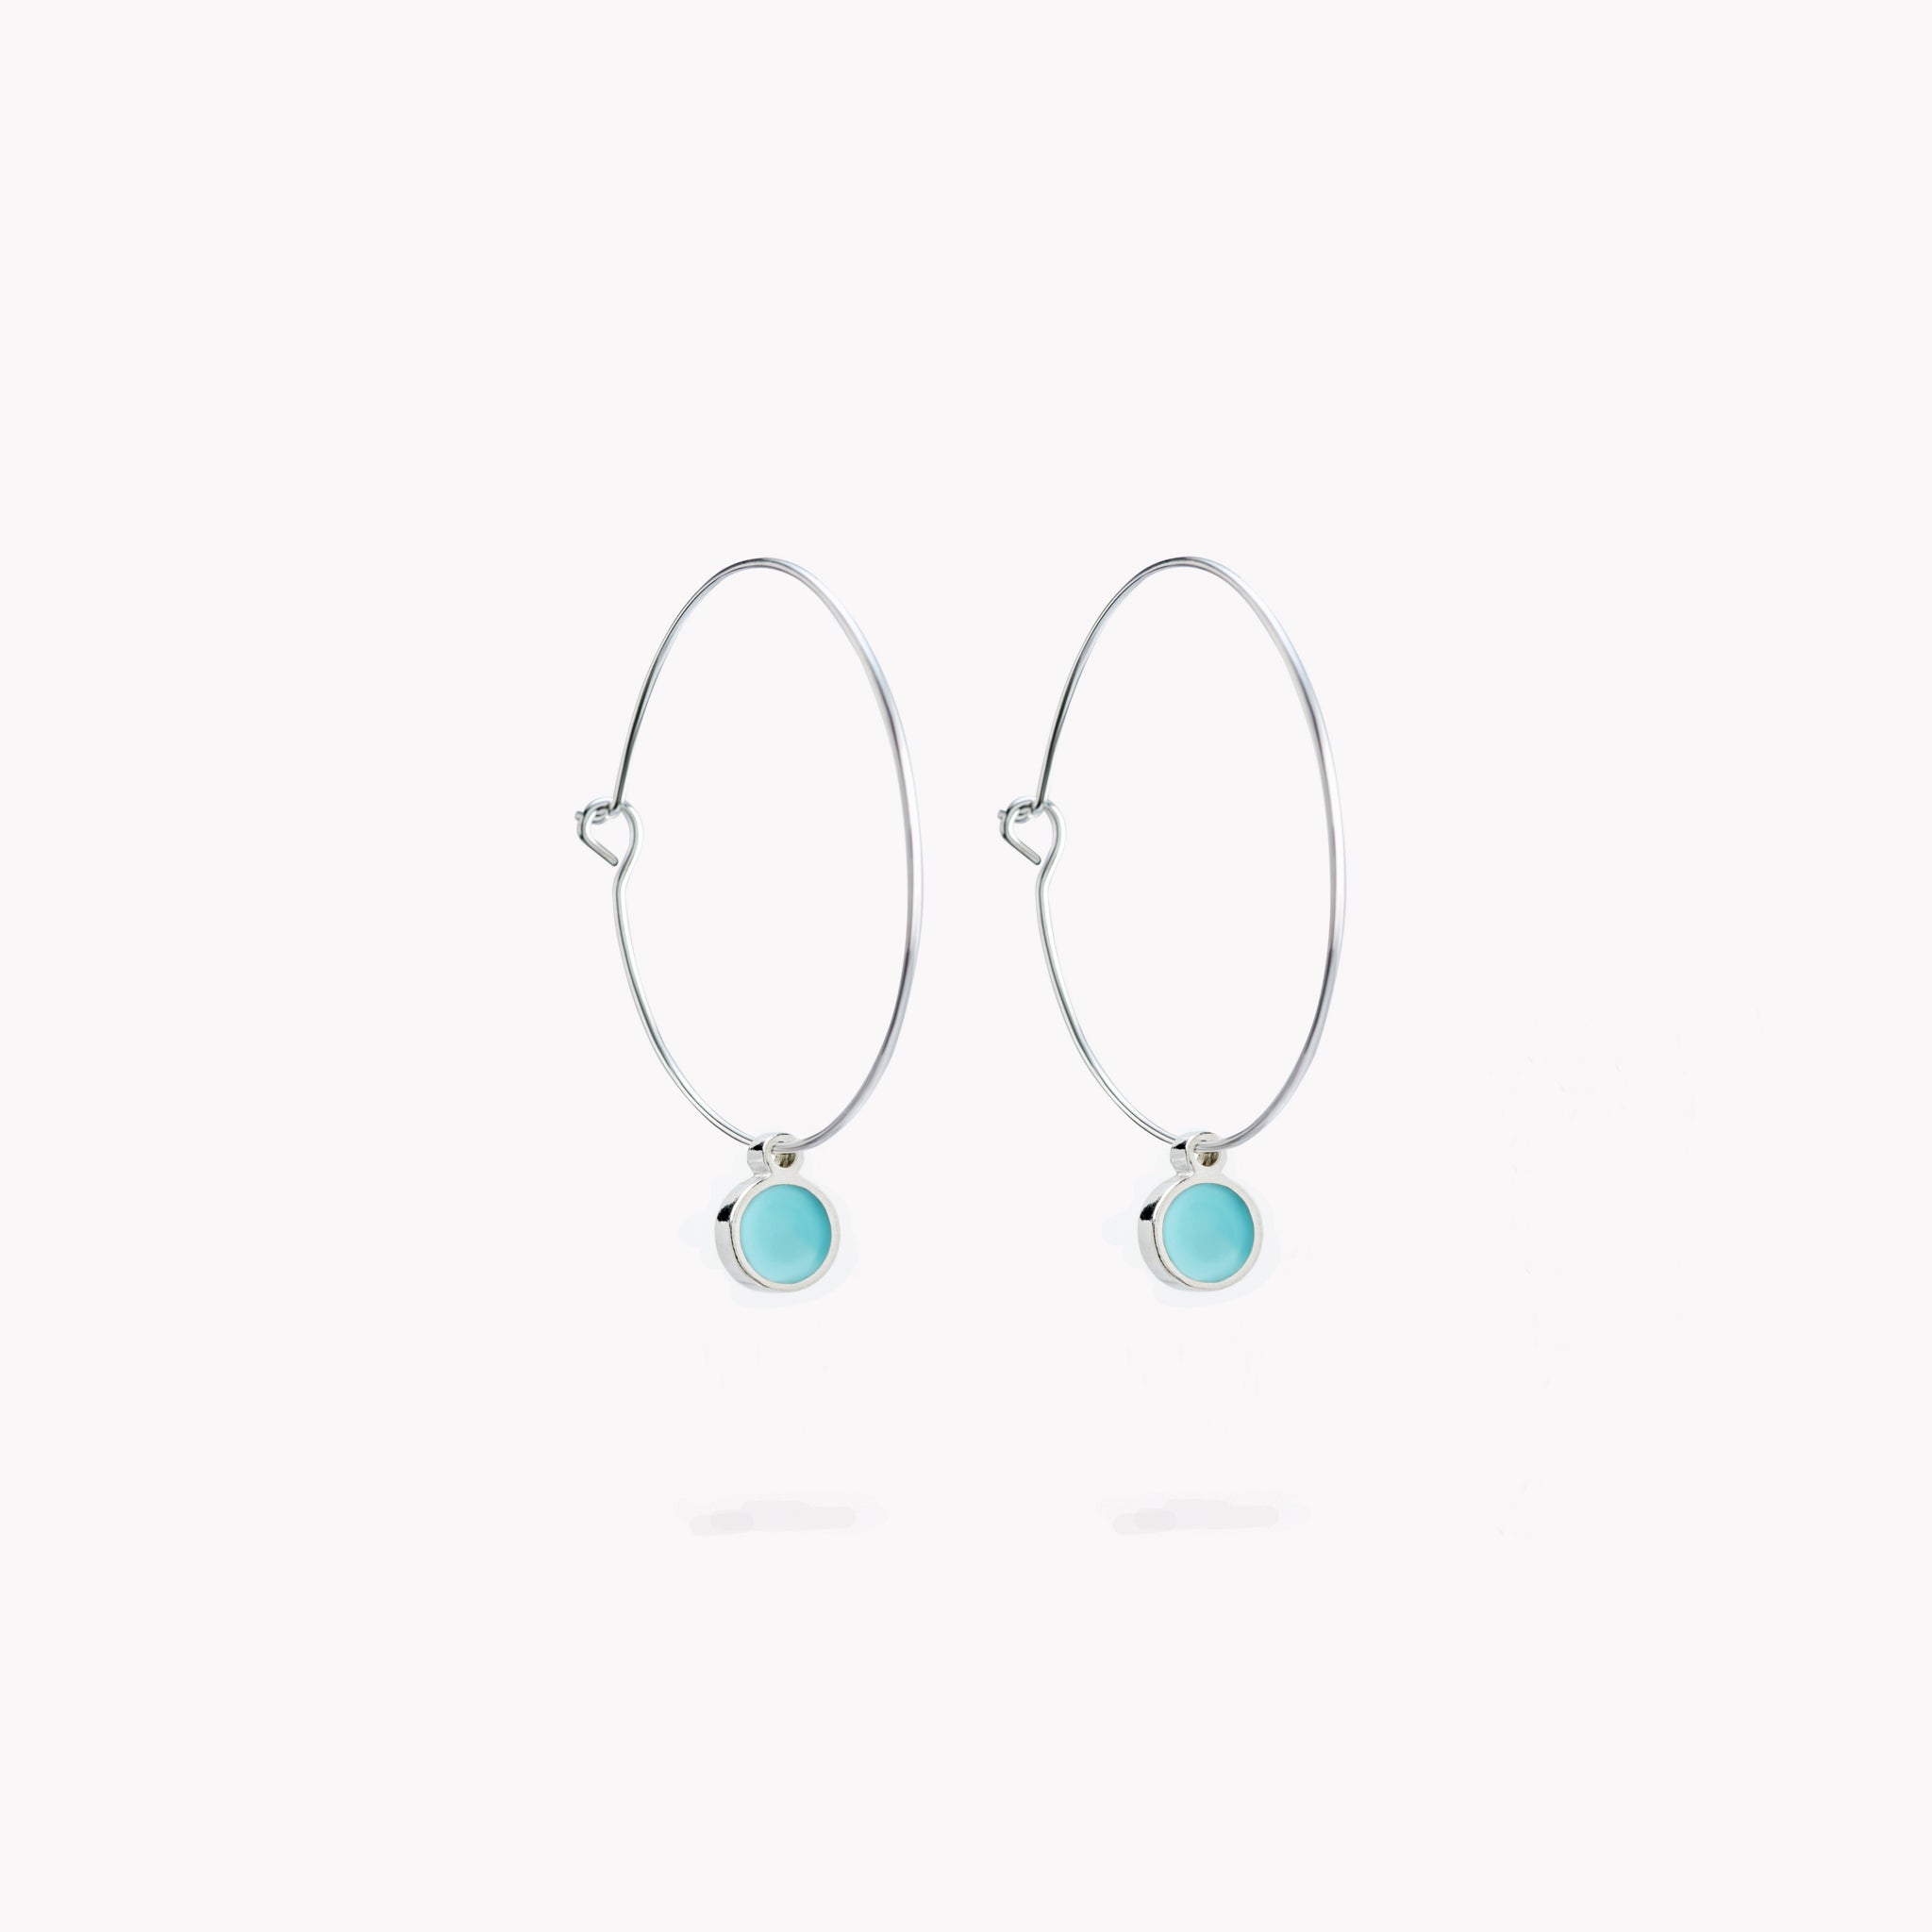 A pair of simple hoop earrings, each with a cool turquoise hanging circular form.